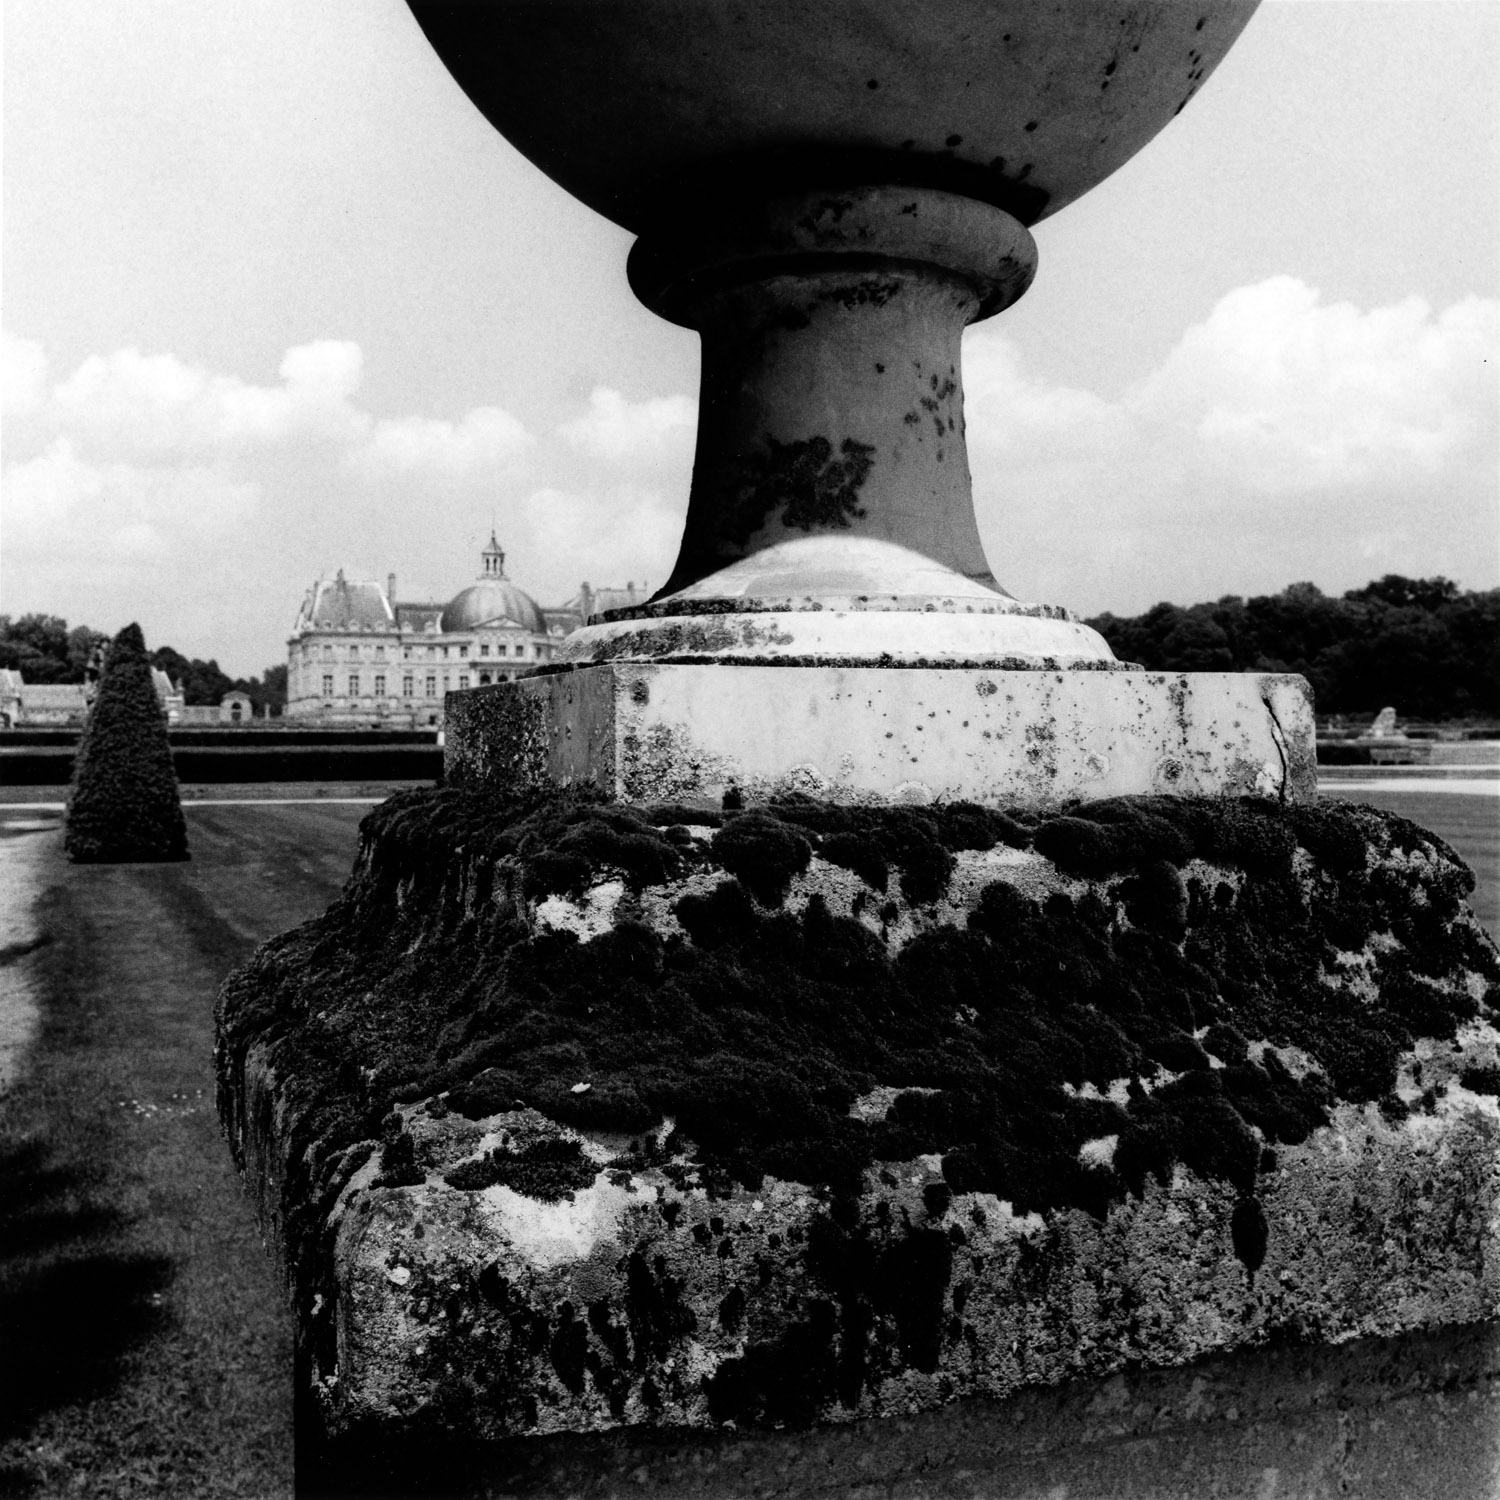 Moss and Urn, Vaux le Vicomte